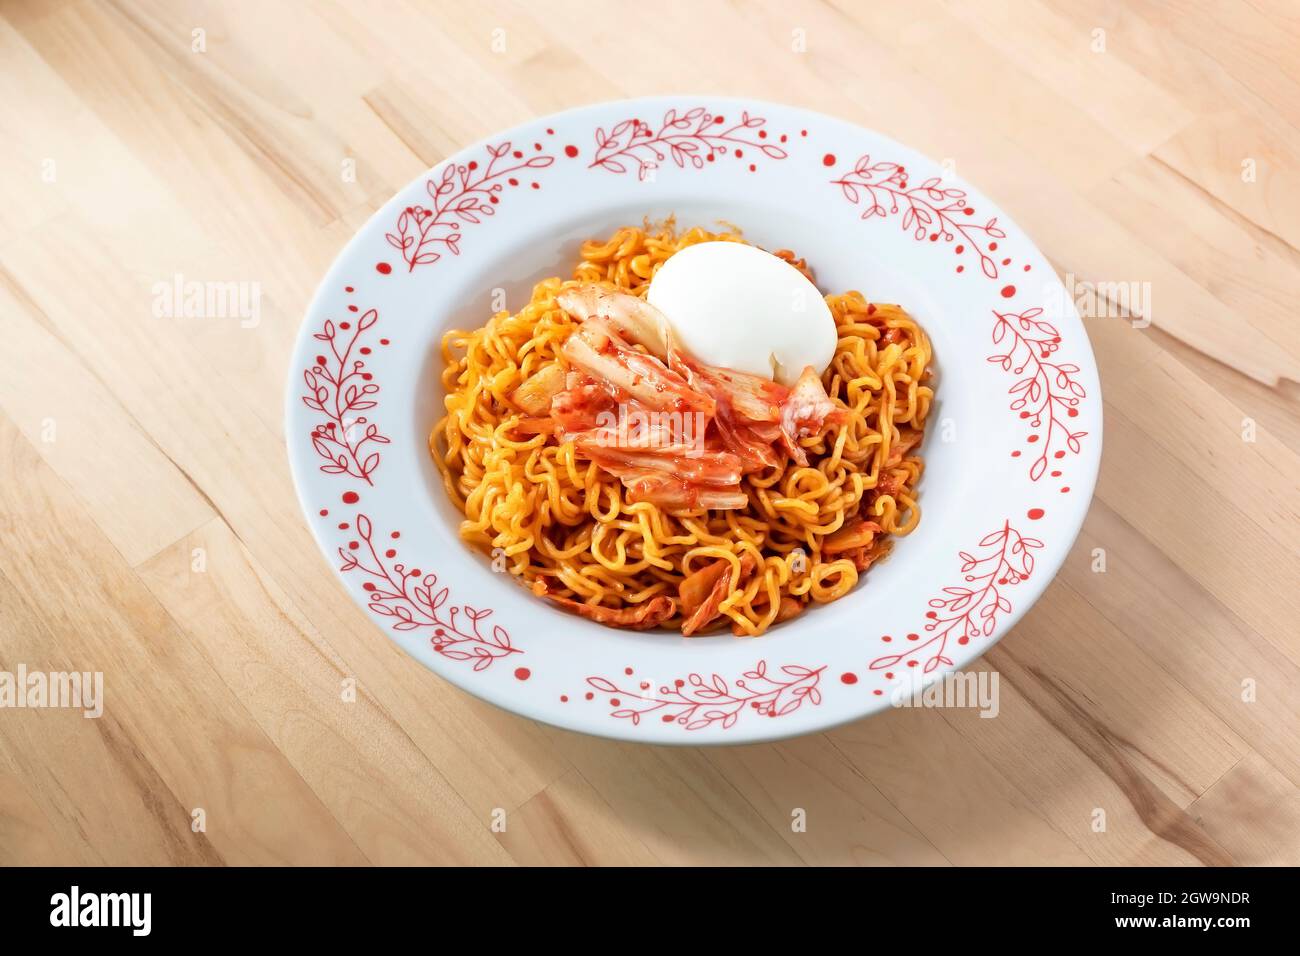 High Angle View Of Noodles In Plate On Table Stock Photo